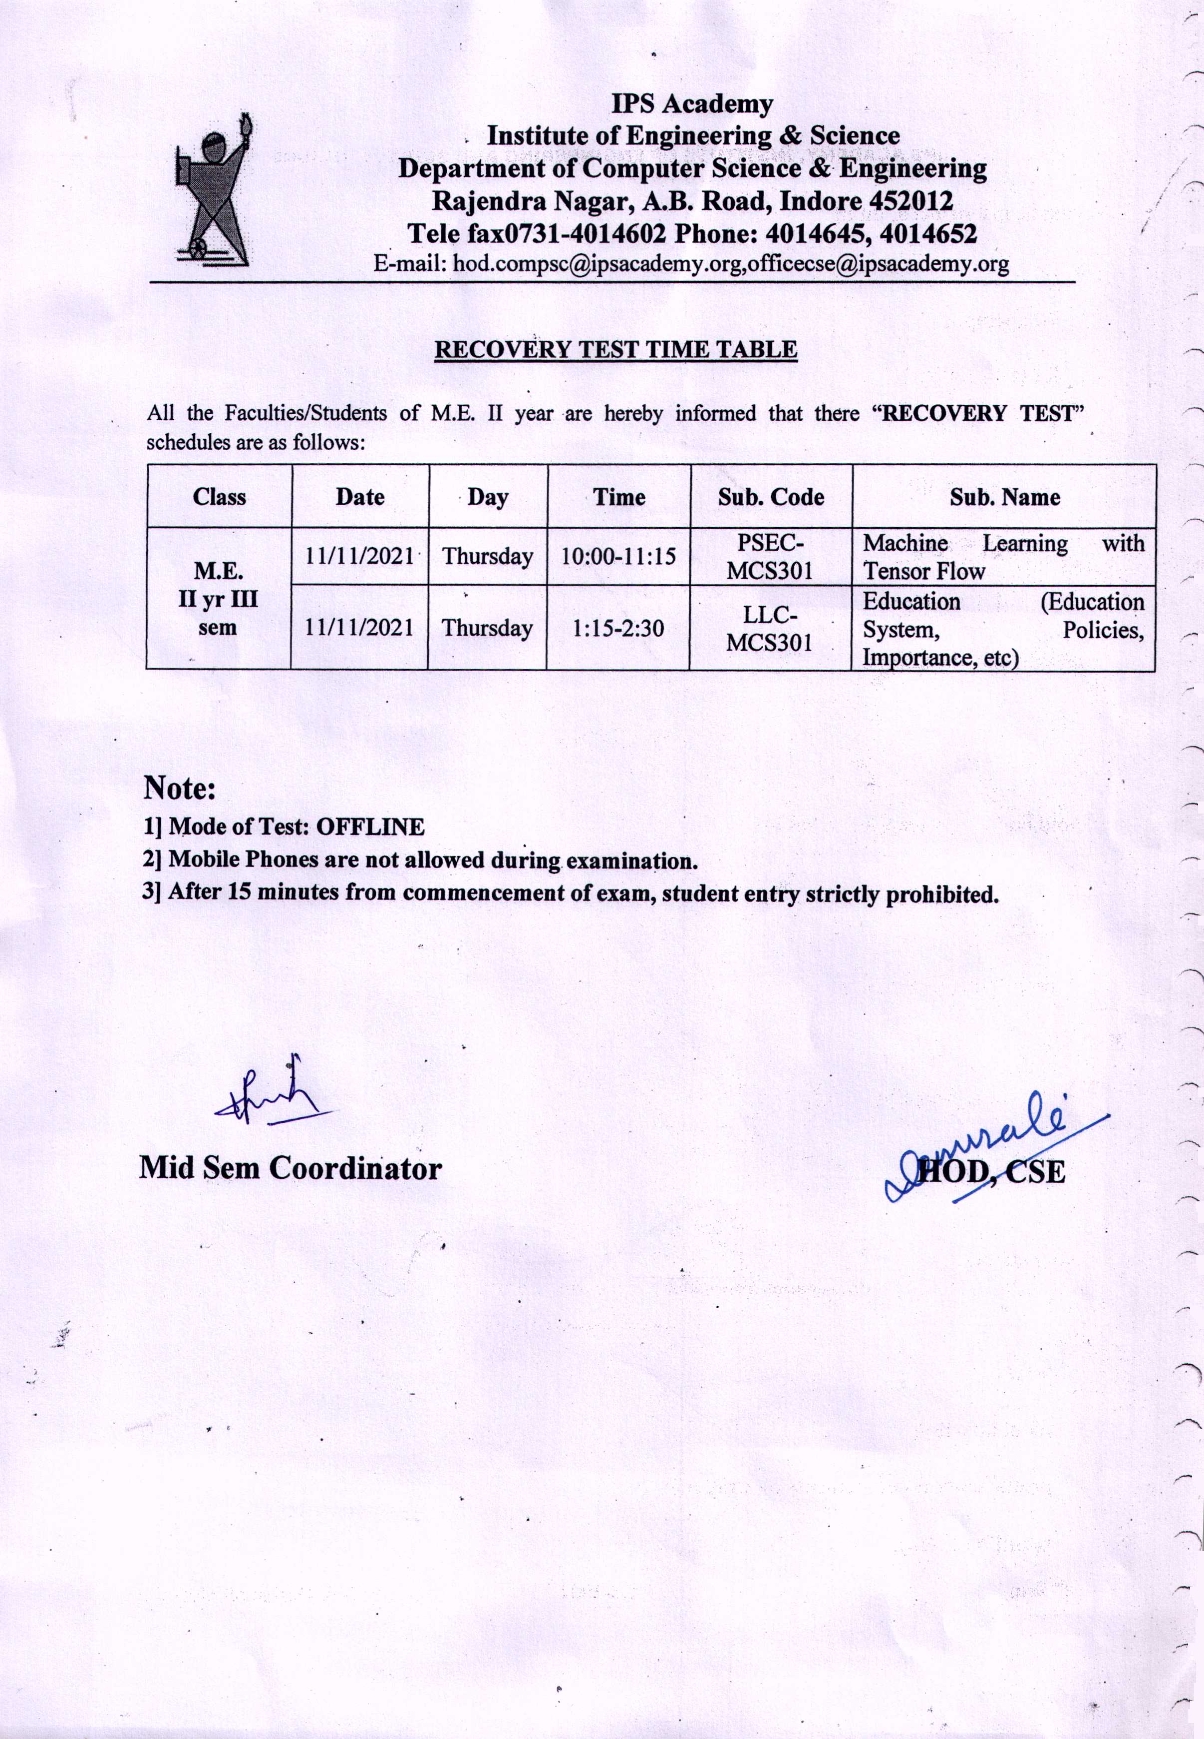 me recovery test time table_001